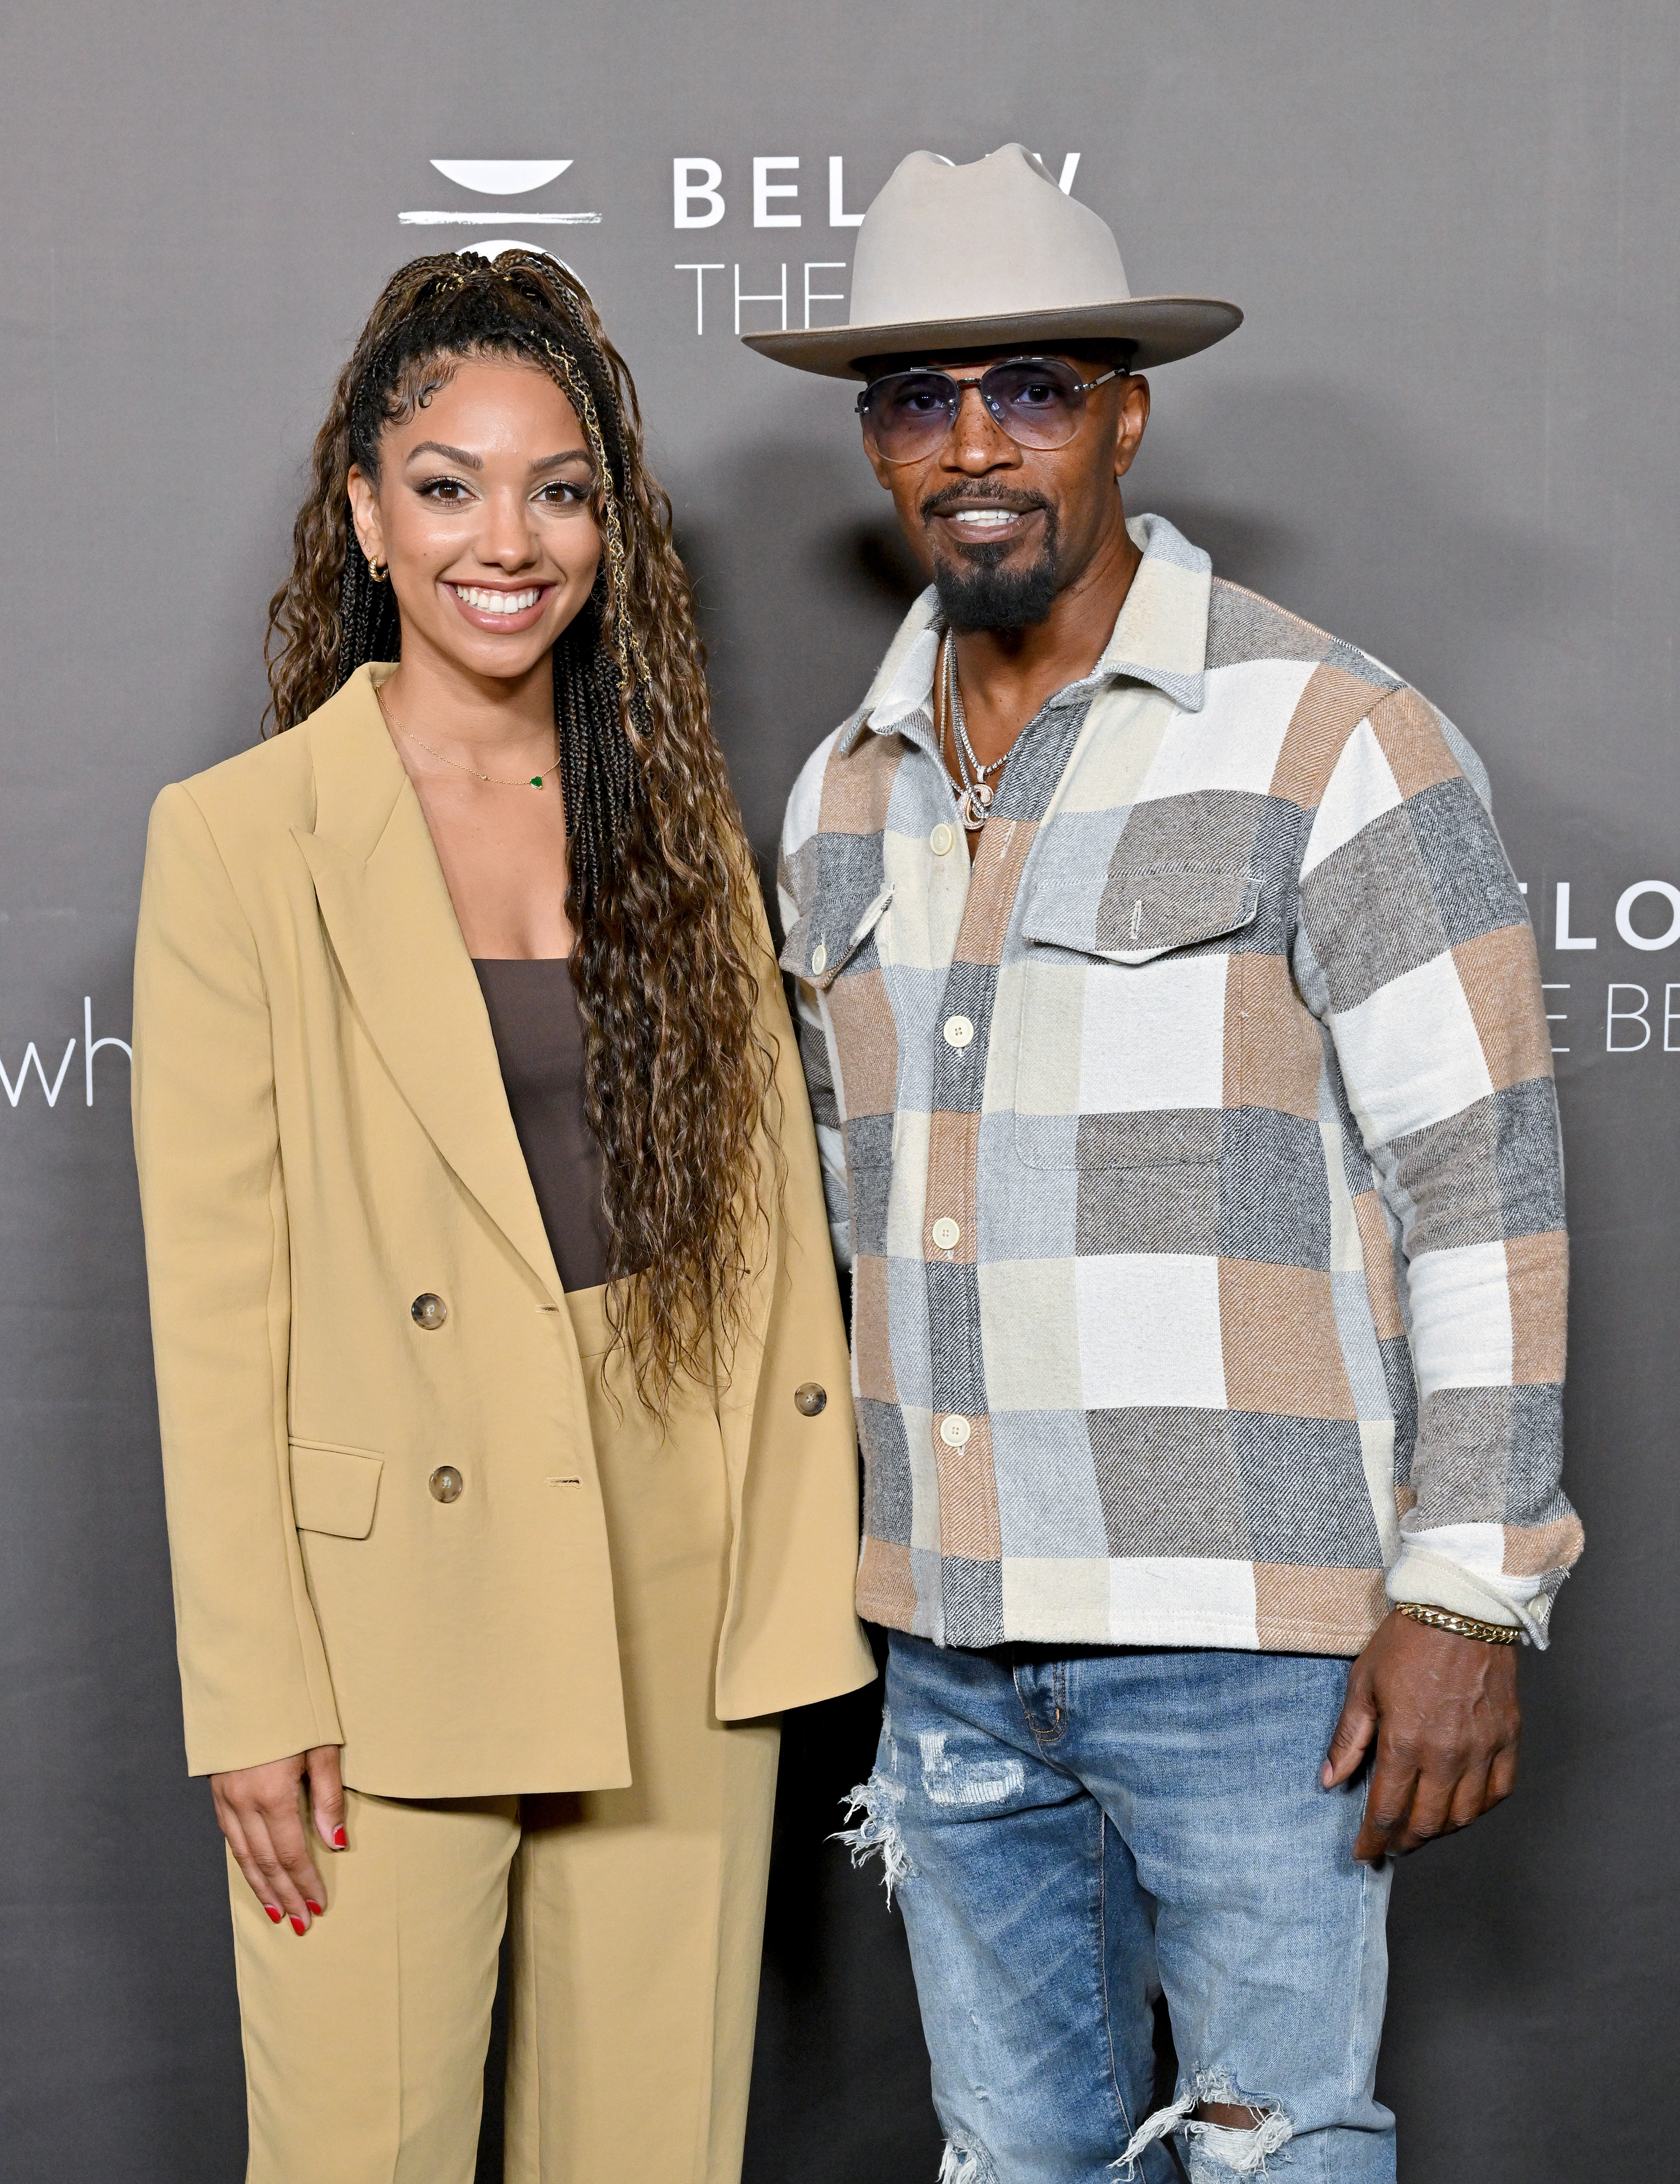 Corinne and Jamie Foxx at the Los Angeles, California screening of "Below The Belt" on October 1, 2022 | Source: Getty Images